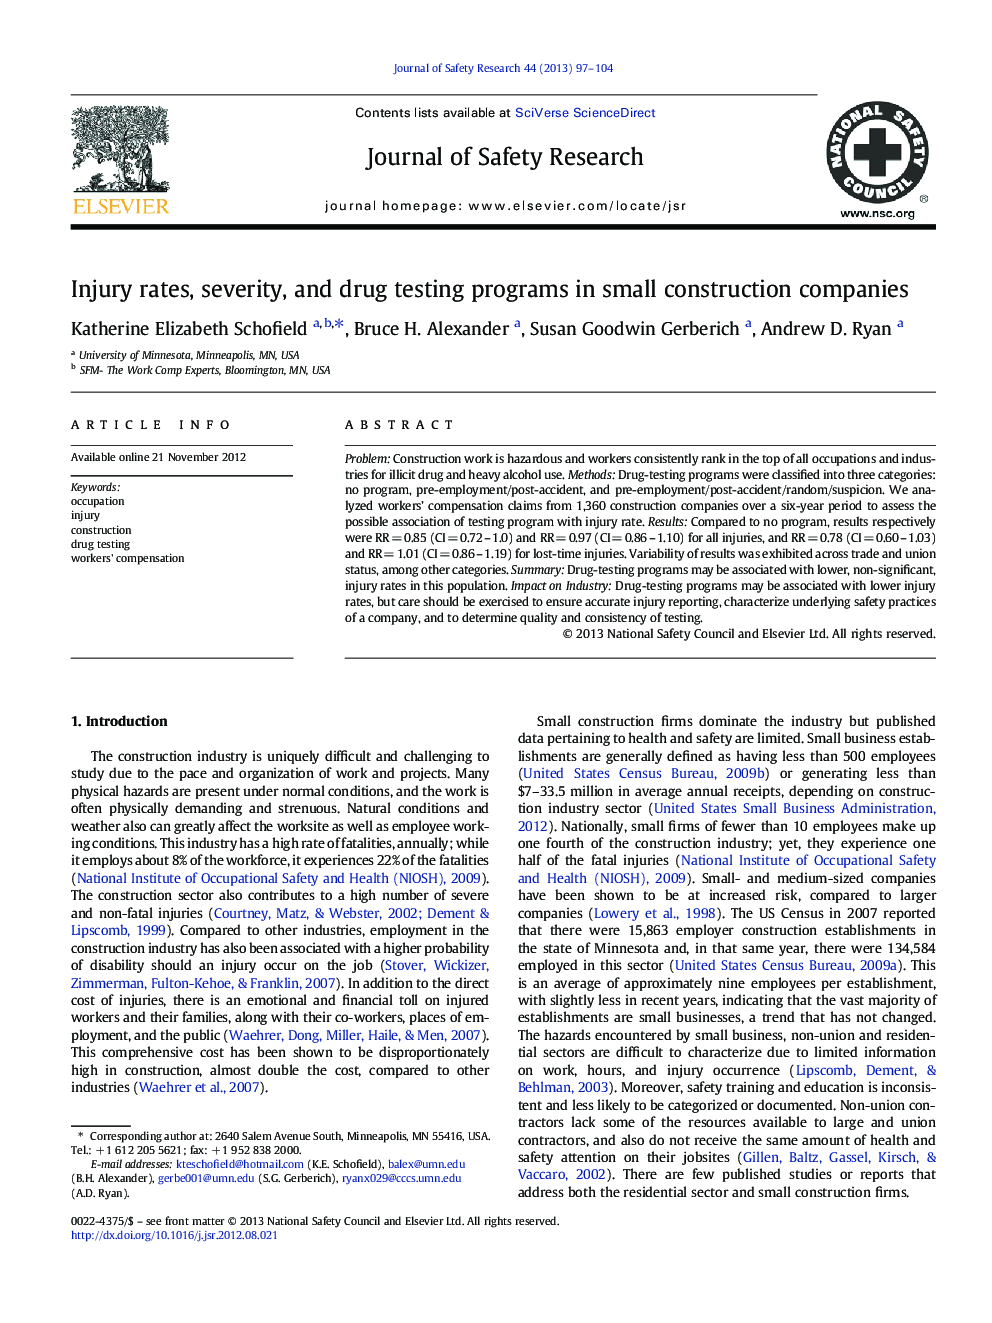 Injury rates, severity, and drug testing programs in small construction companies